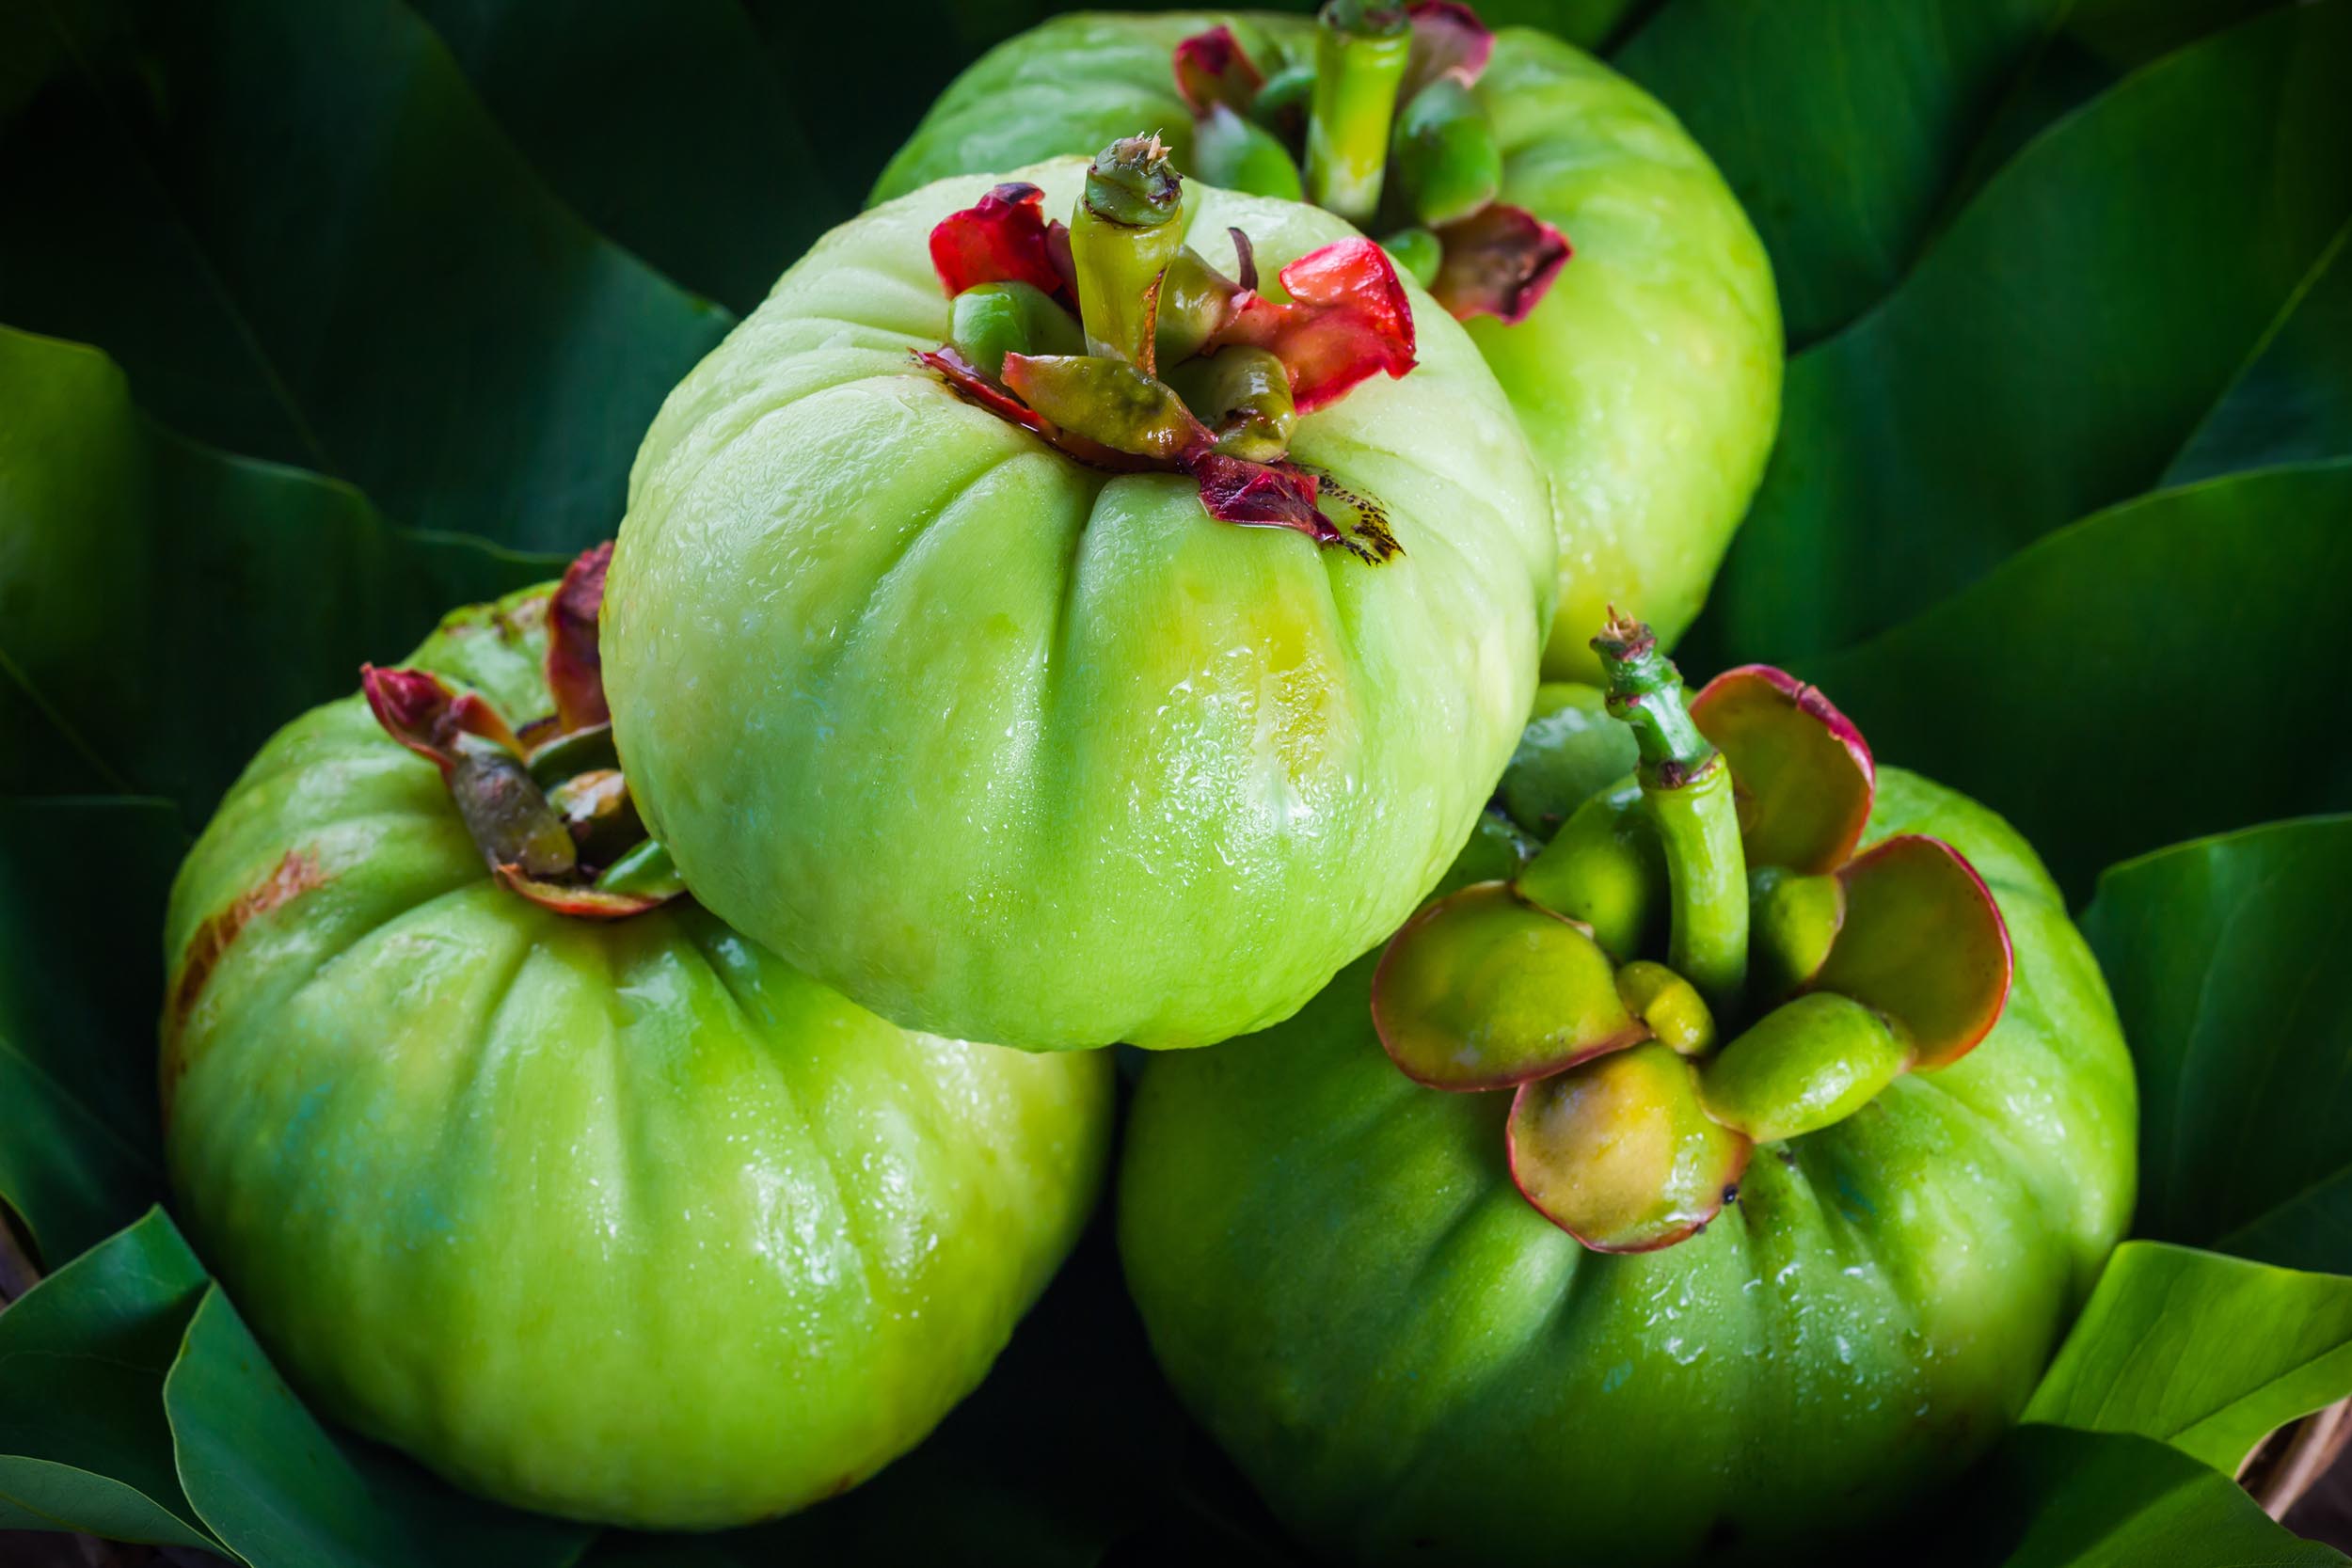 Does Garcinia Cambogia Extract Work for Weight Loss?